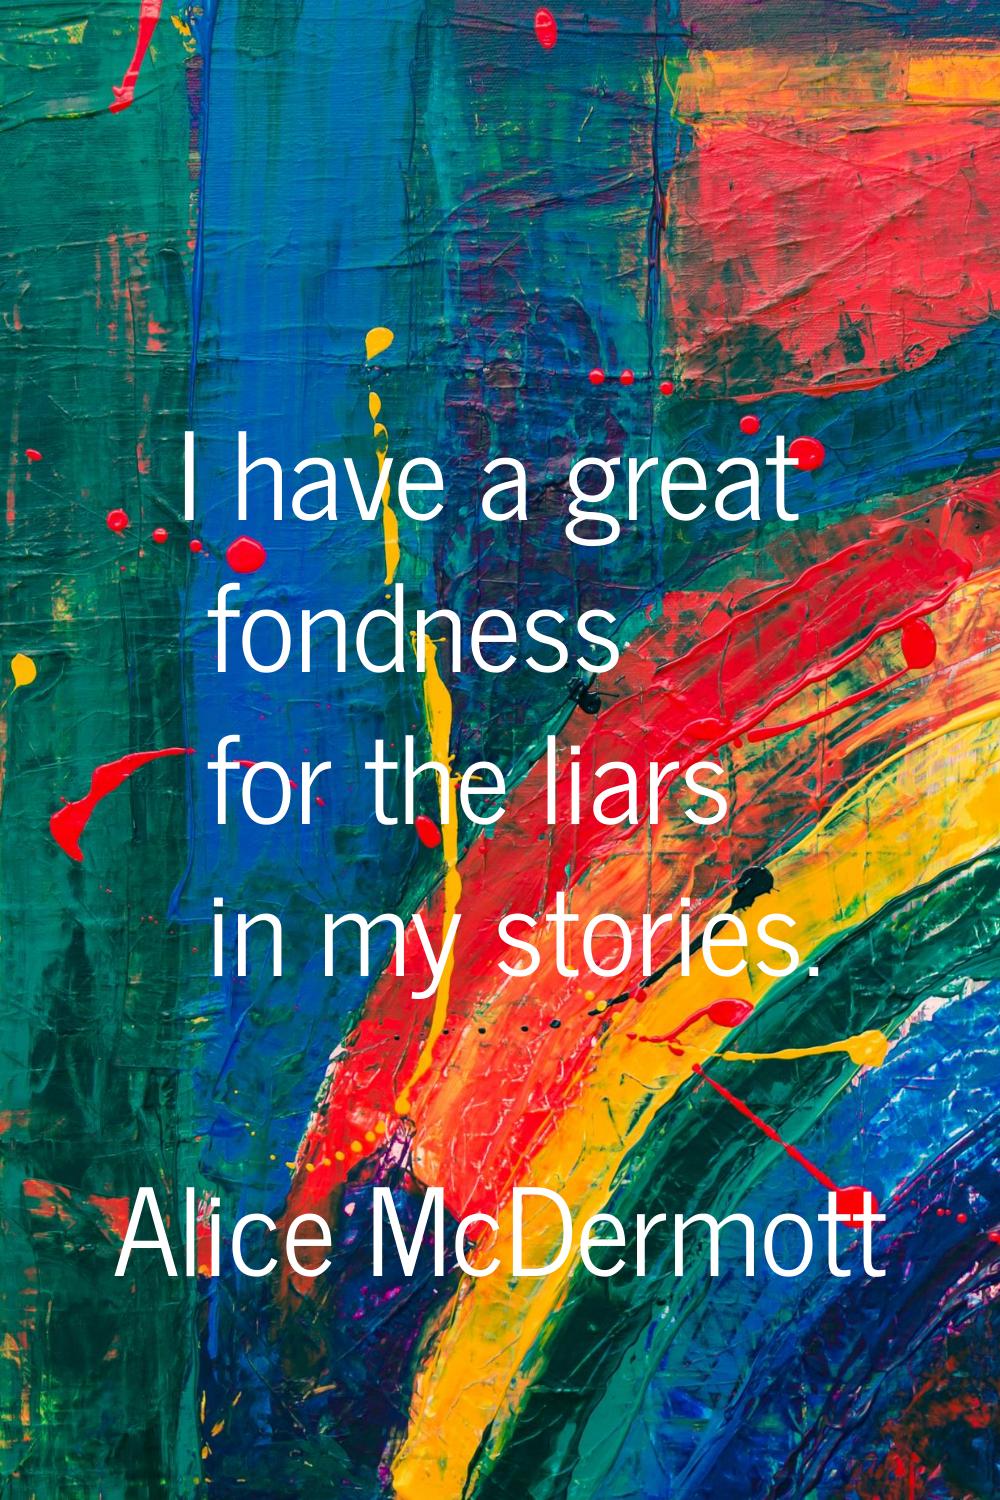 I have a great fondness for the liars in my stories.